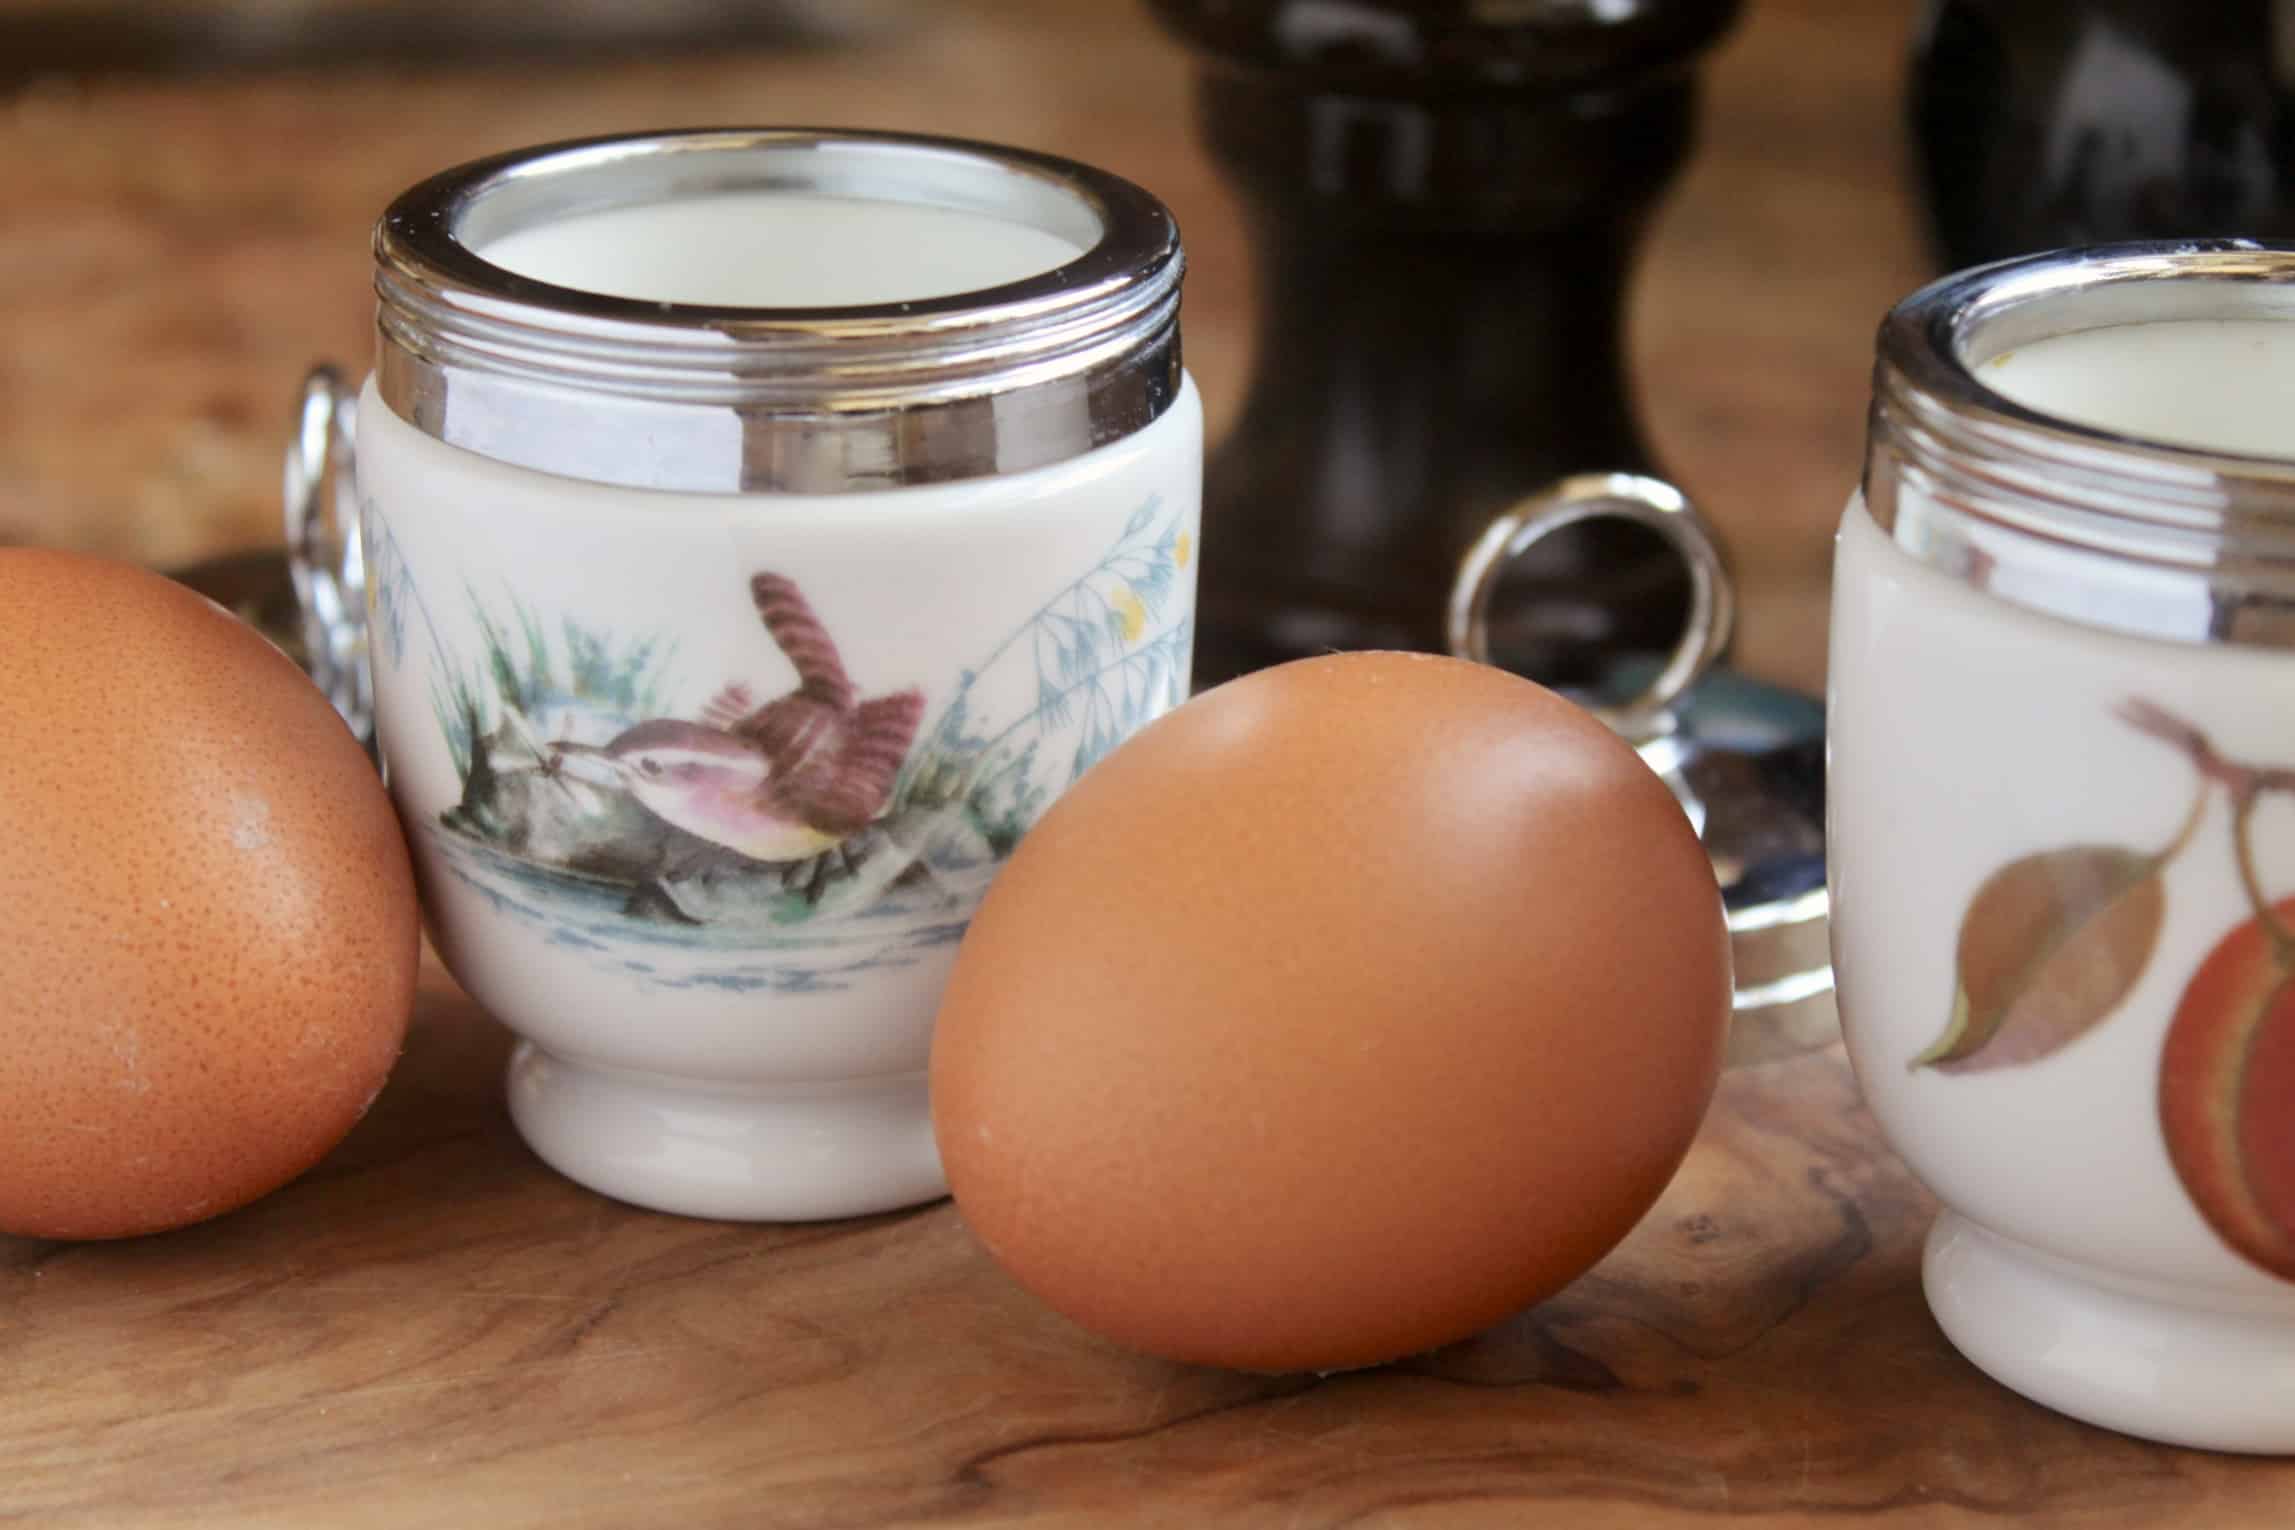 Coddled Eggs in Elegant Glass Vessels - The New York Times